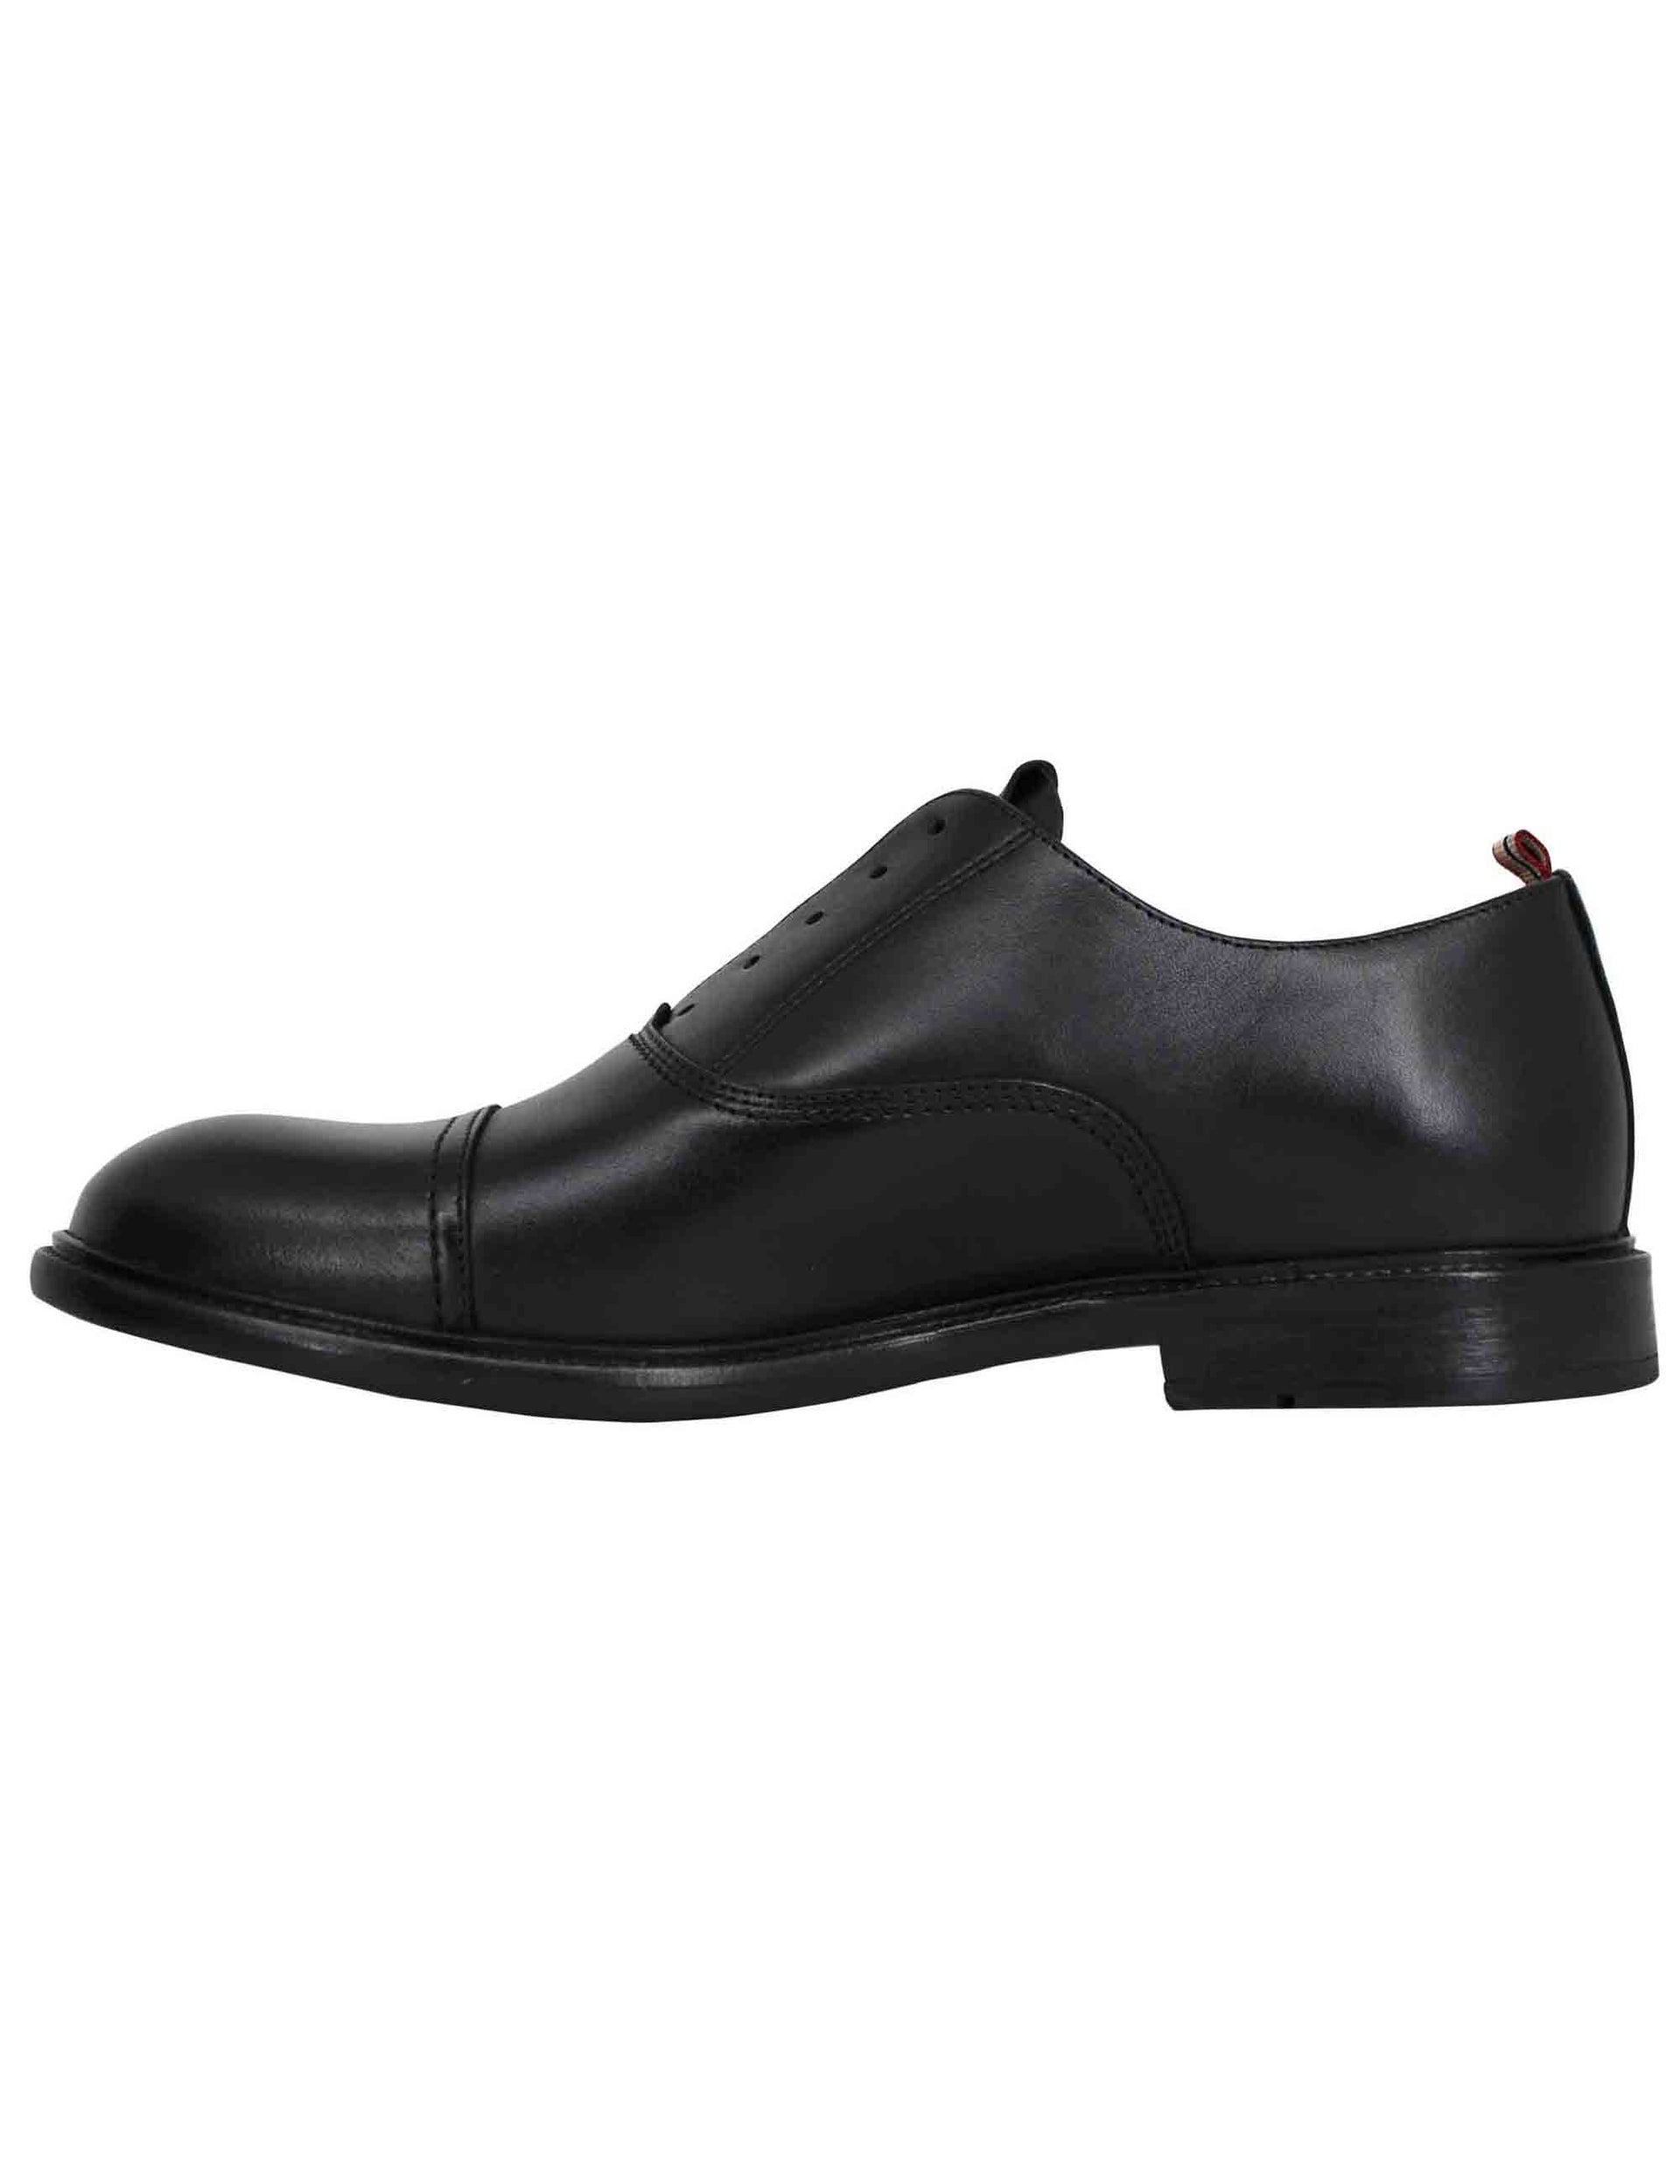 Caye men's lace-ups in black leather